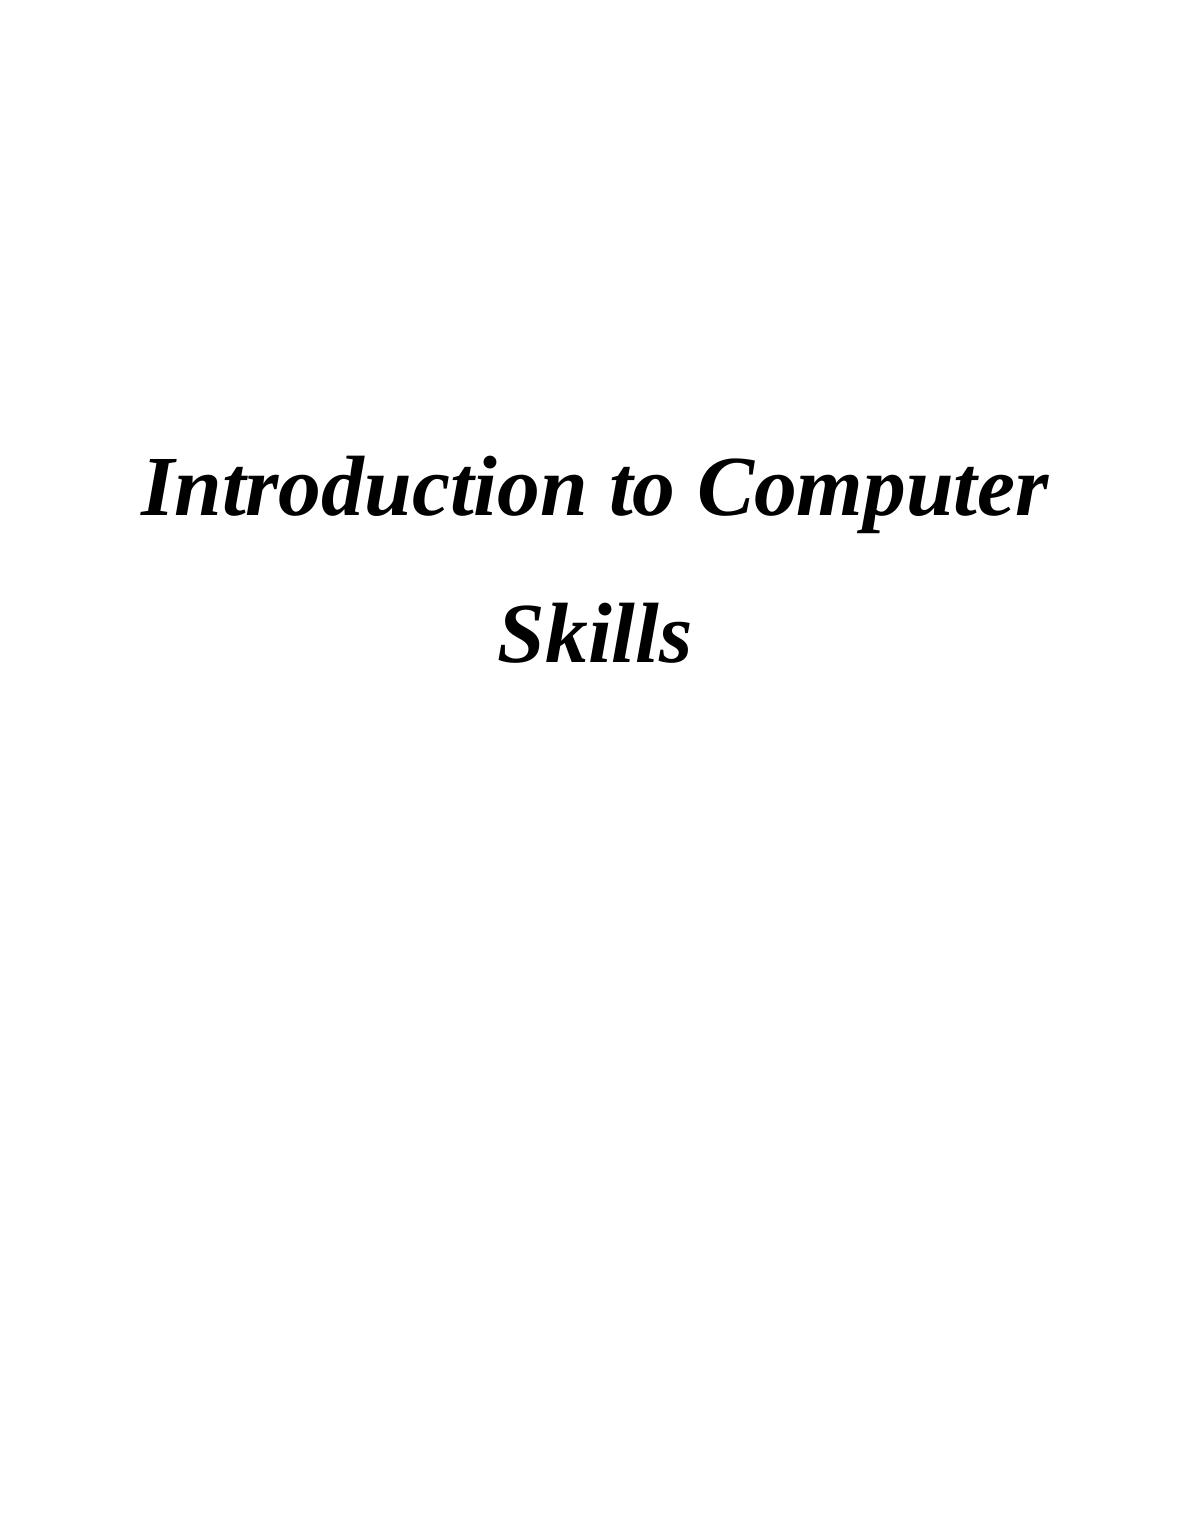 Introduction to computer science : Assignment_1